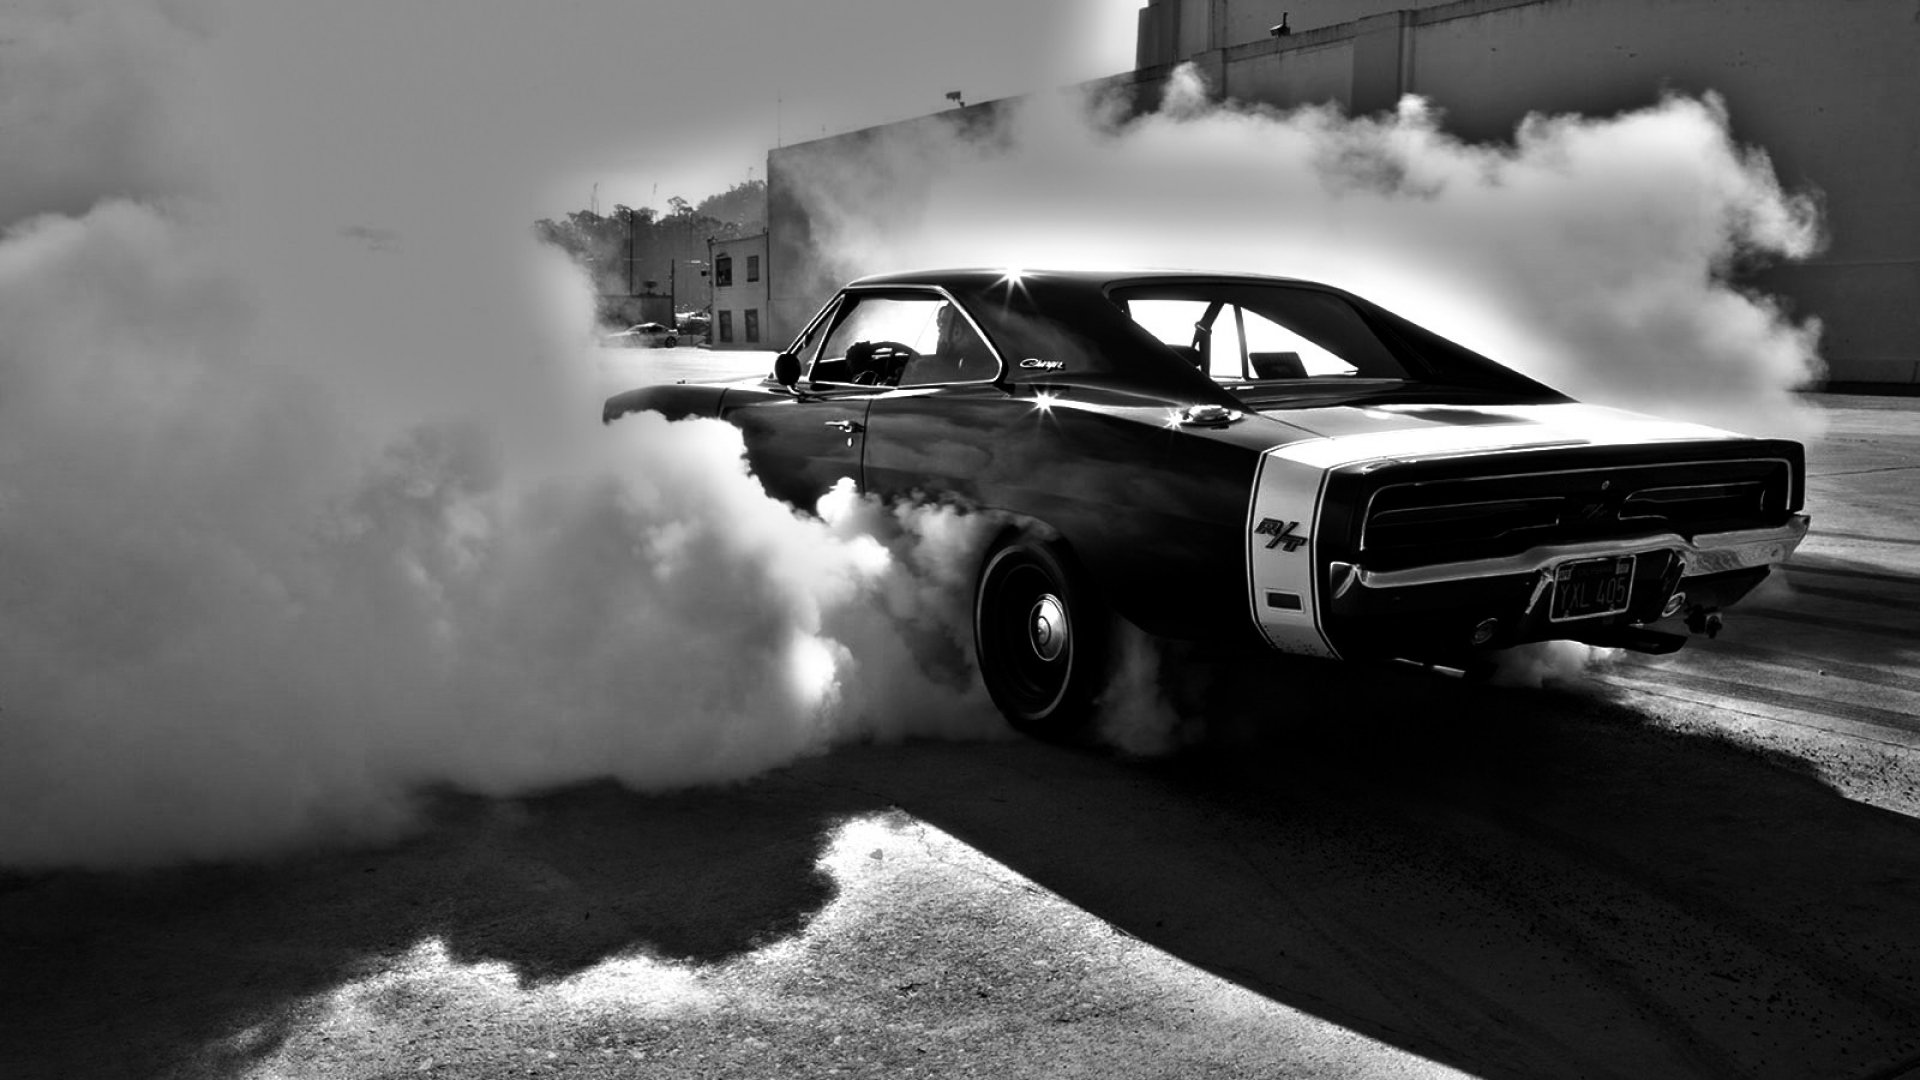 Nothing found for Muscle Car Burnout Hd Wallpaper 1920X1080